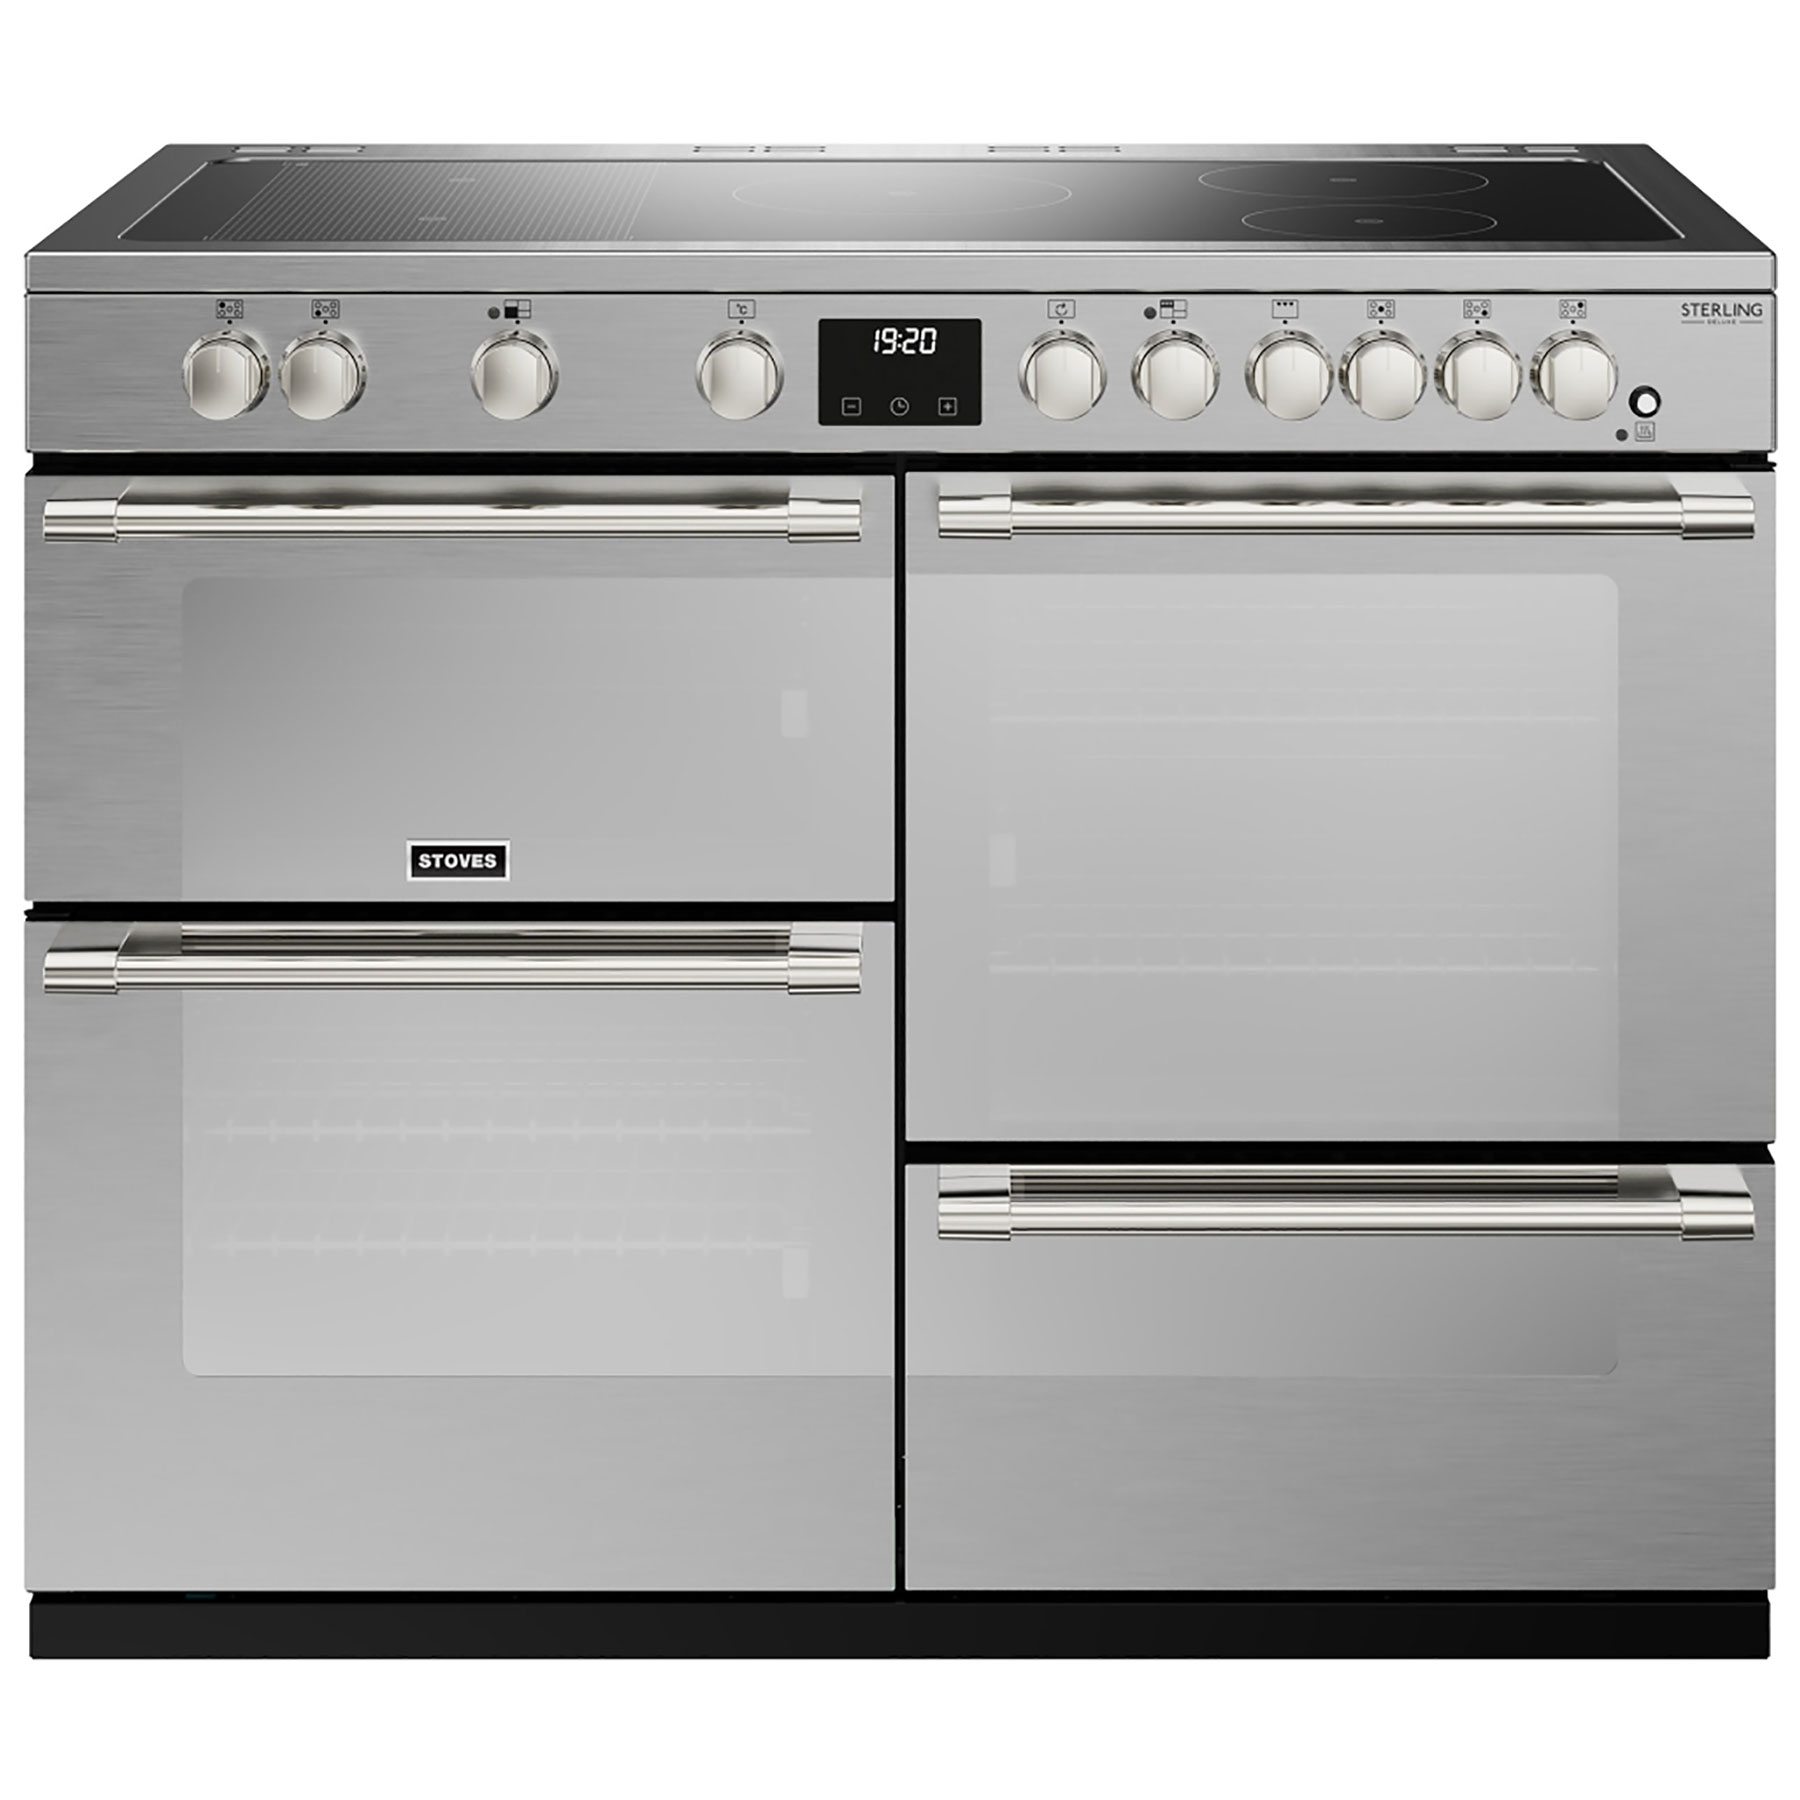 Photos - Oven Stoves 444411480 110cm Sterling DX D1100Ei RTY Range St St Induction 